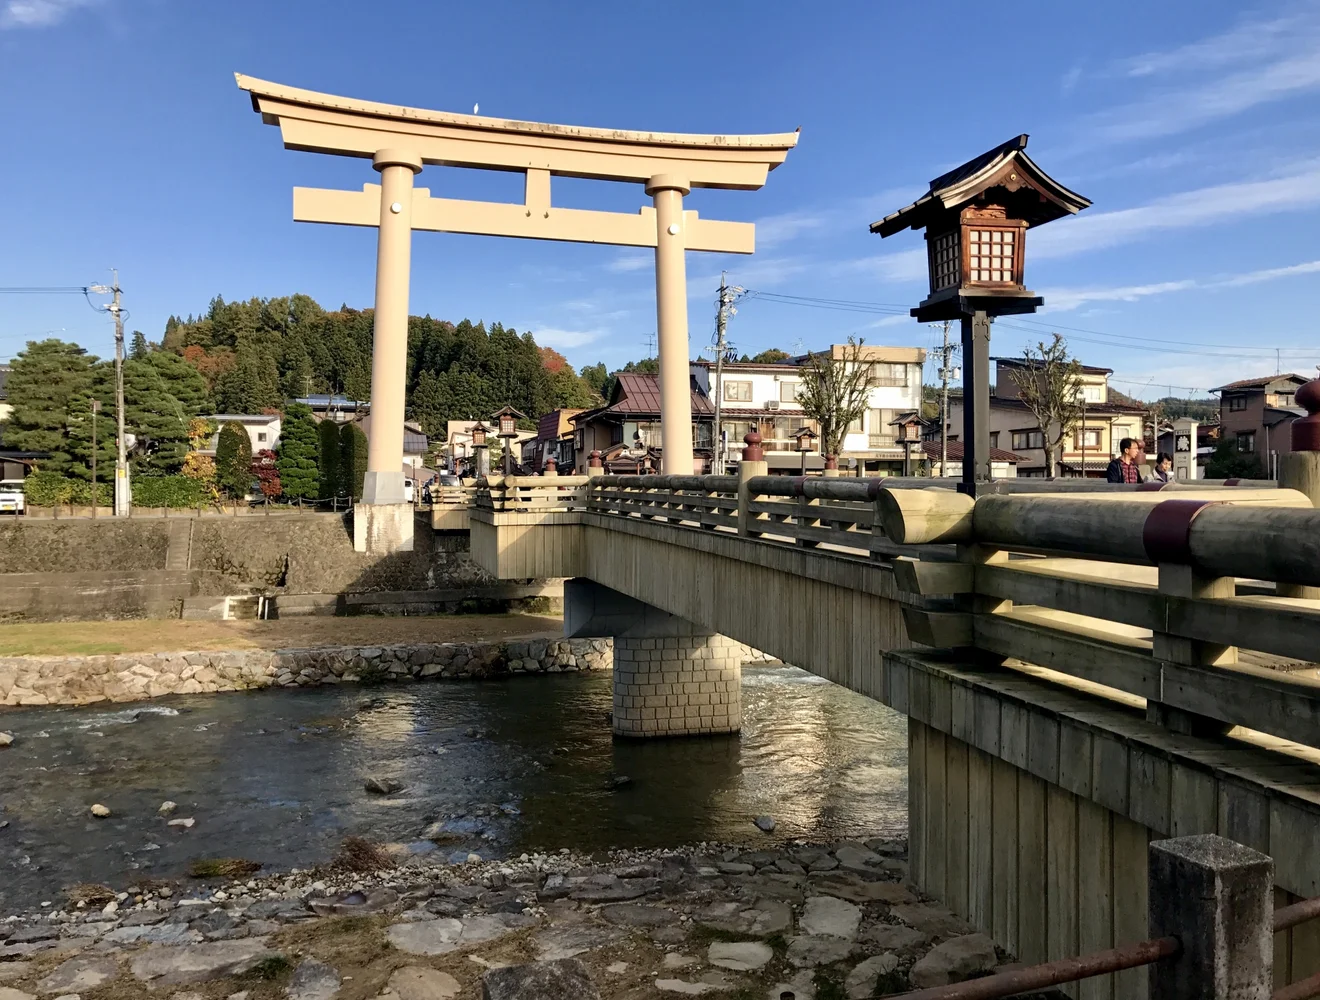 Explore the city of Takayama for its unique culture and history